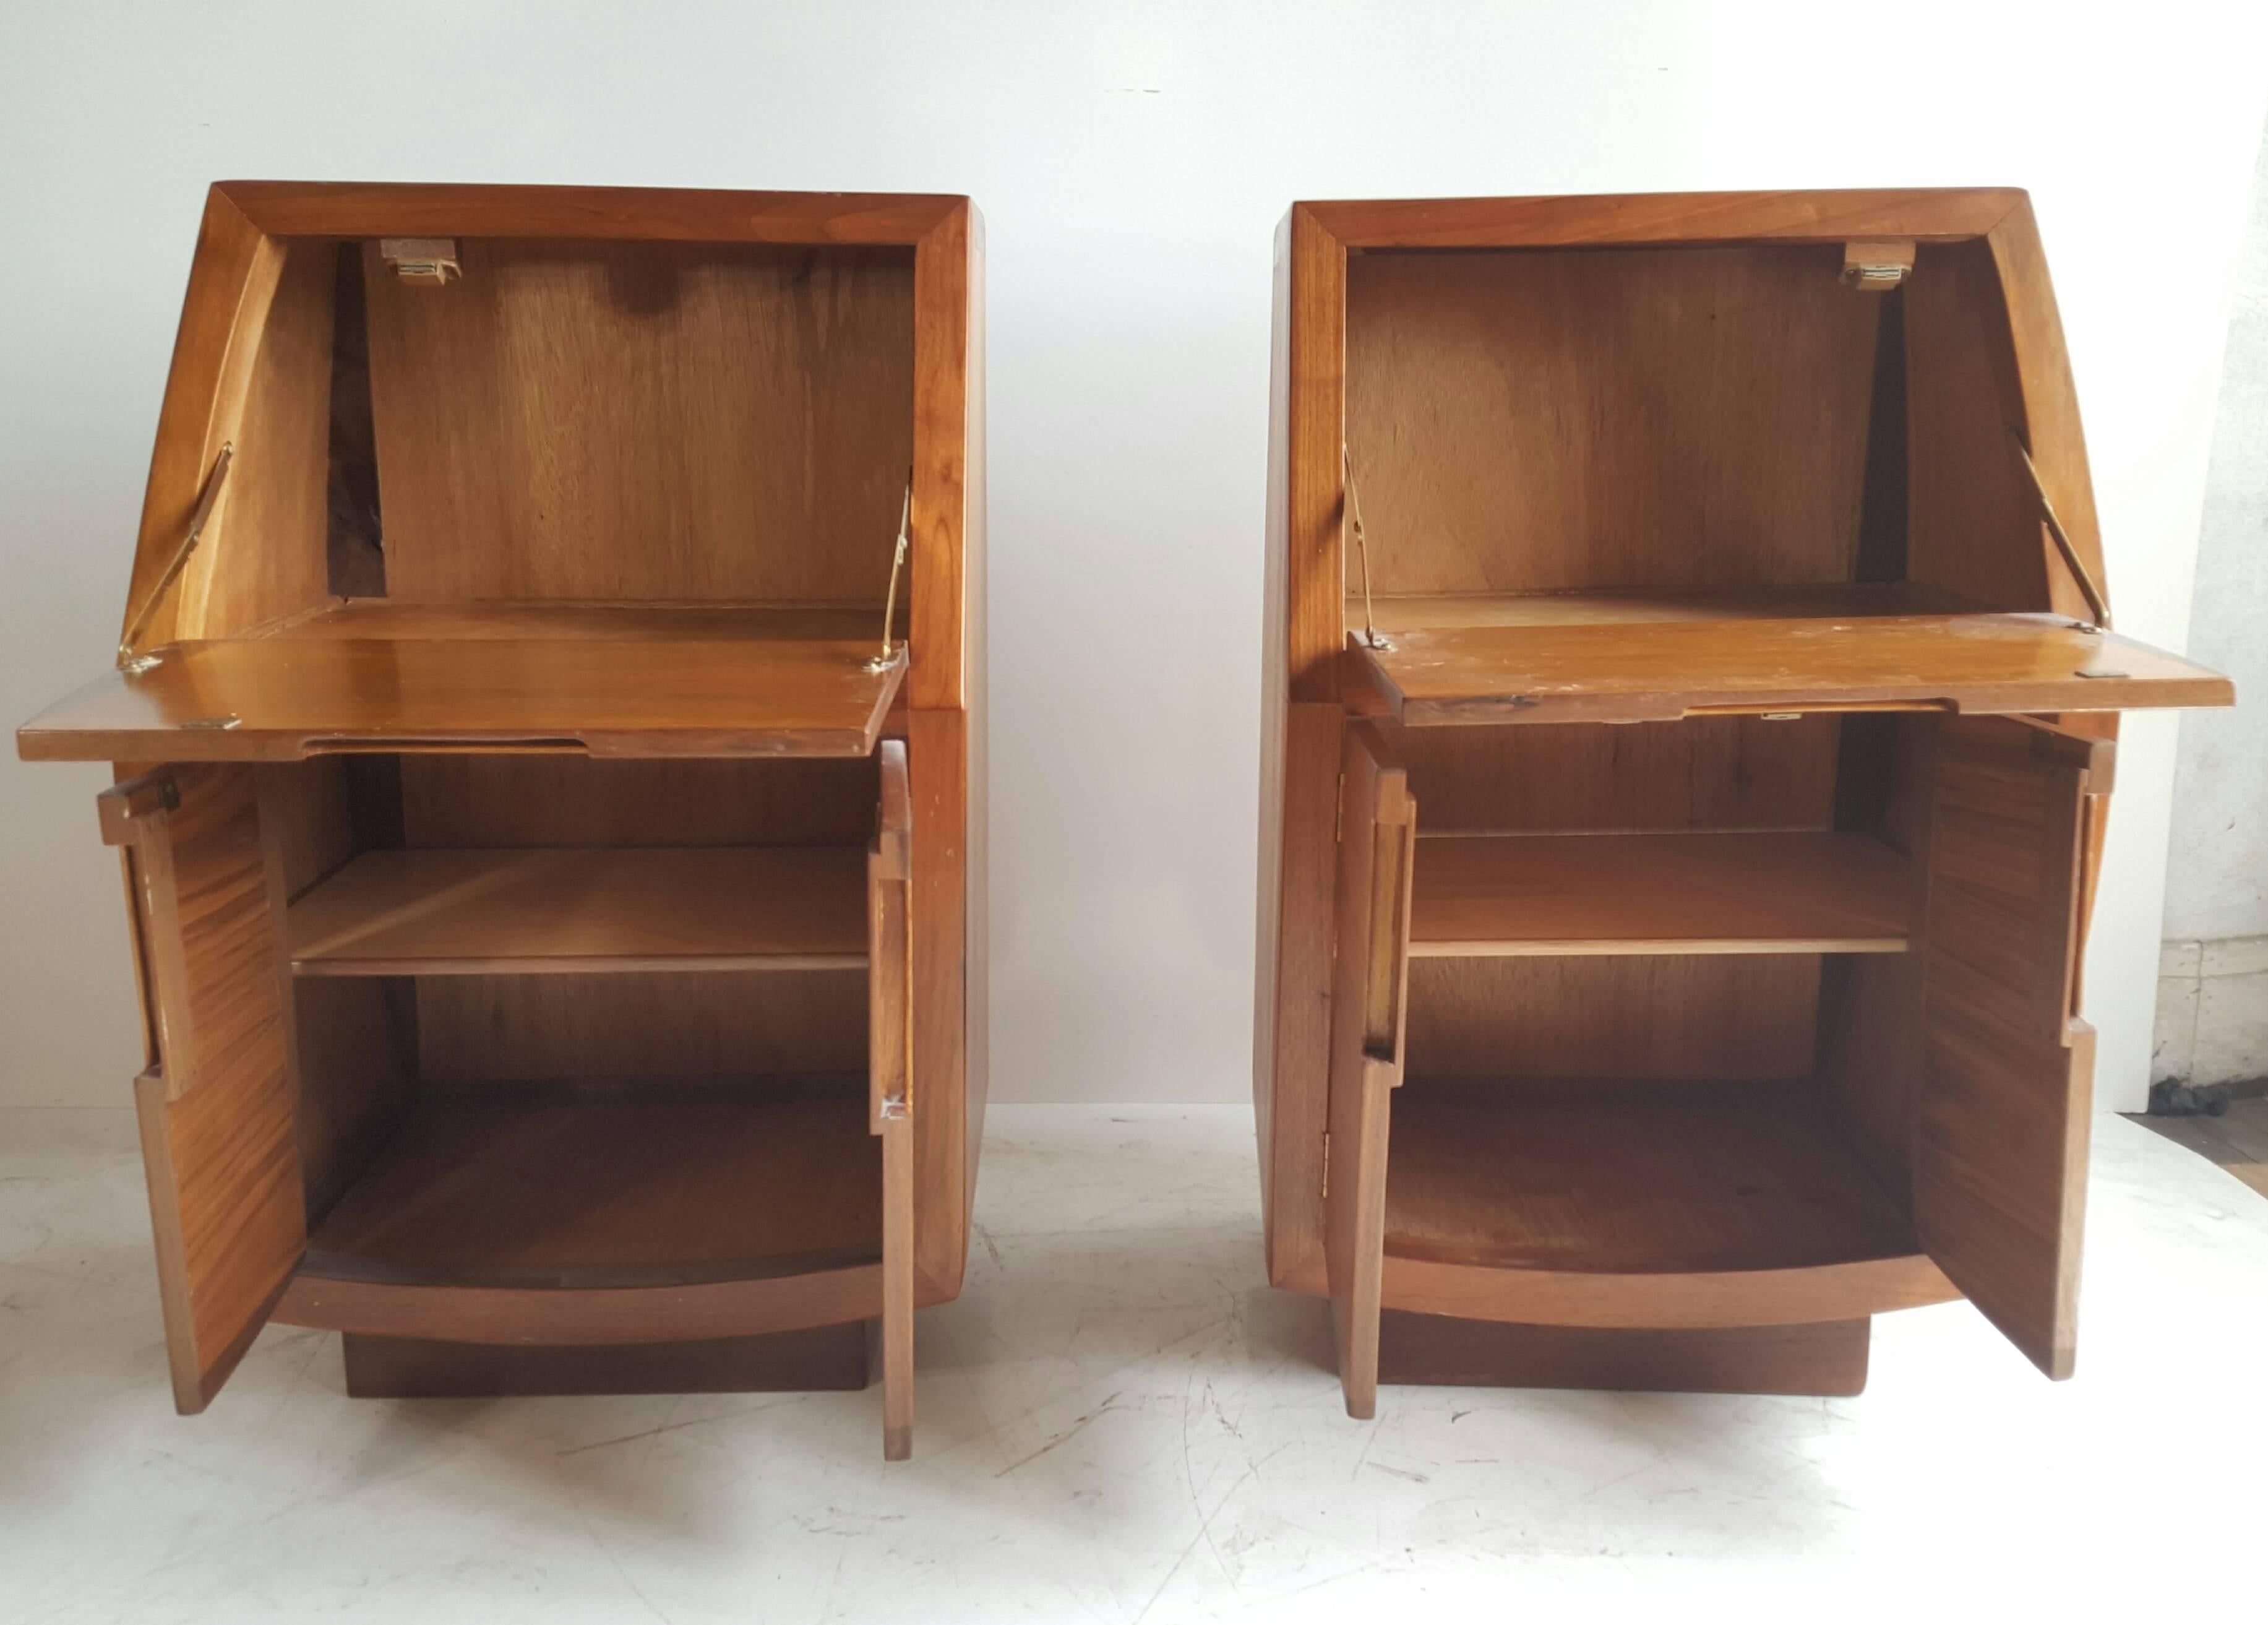 Stunning Organic Modern hand crafted, matched pair of Stands /Bedside Tables,, Solid cherry and rosewood,,featuring curved wood (sides) construction,,Dovetail joinery to plinth..Amazing book match grain,,.. Also available matching chest of drawers